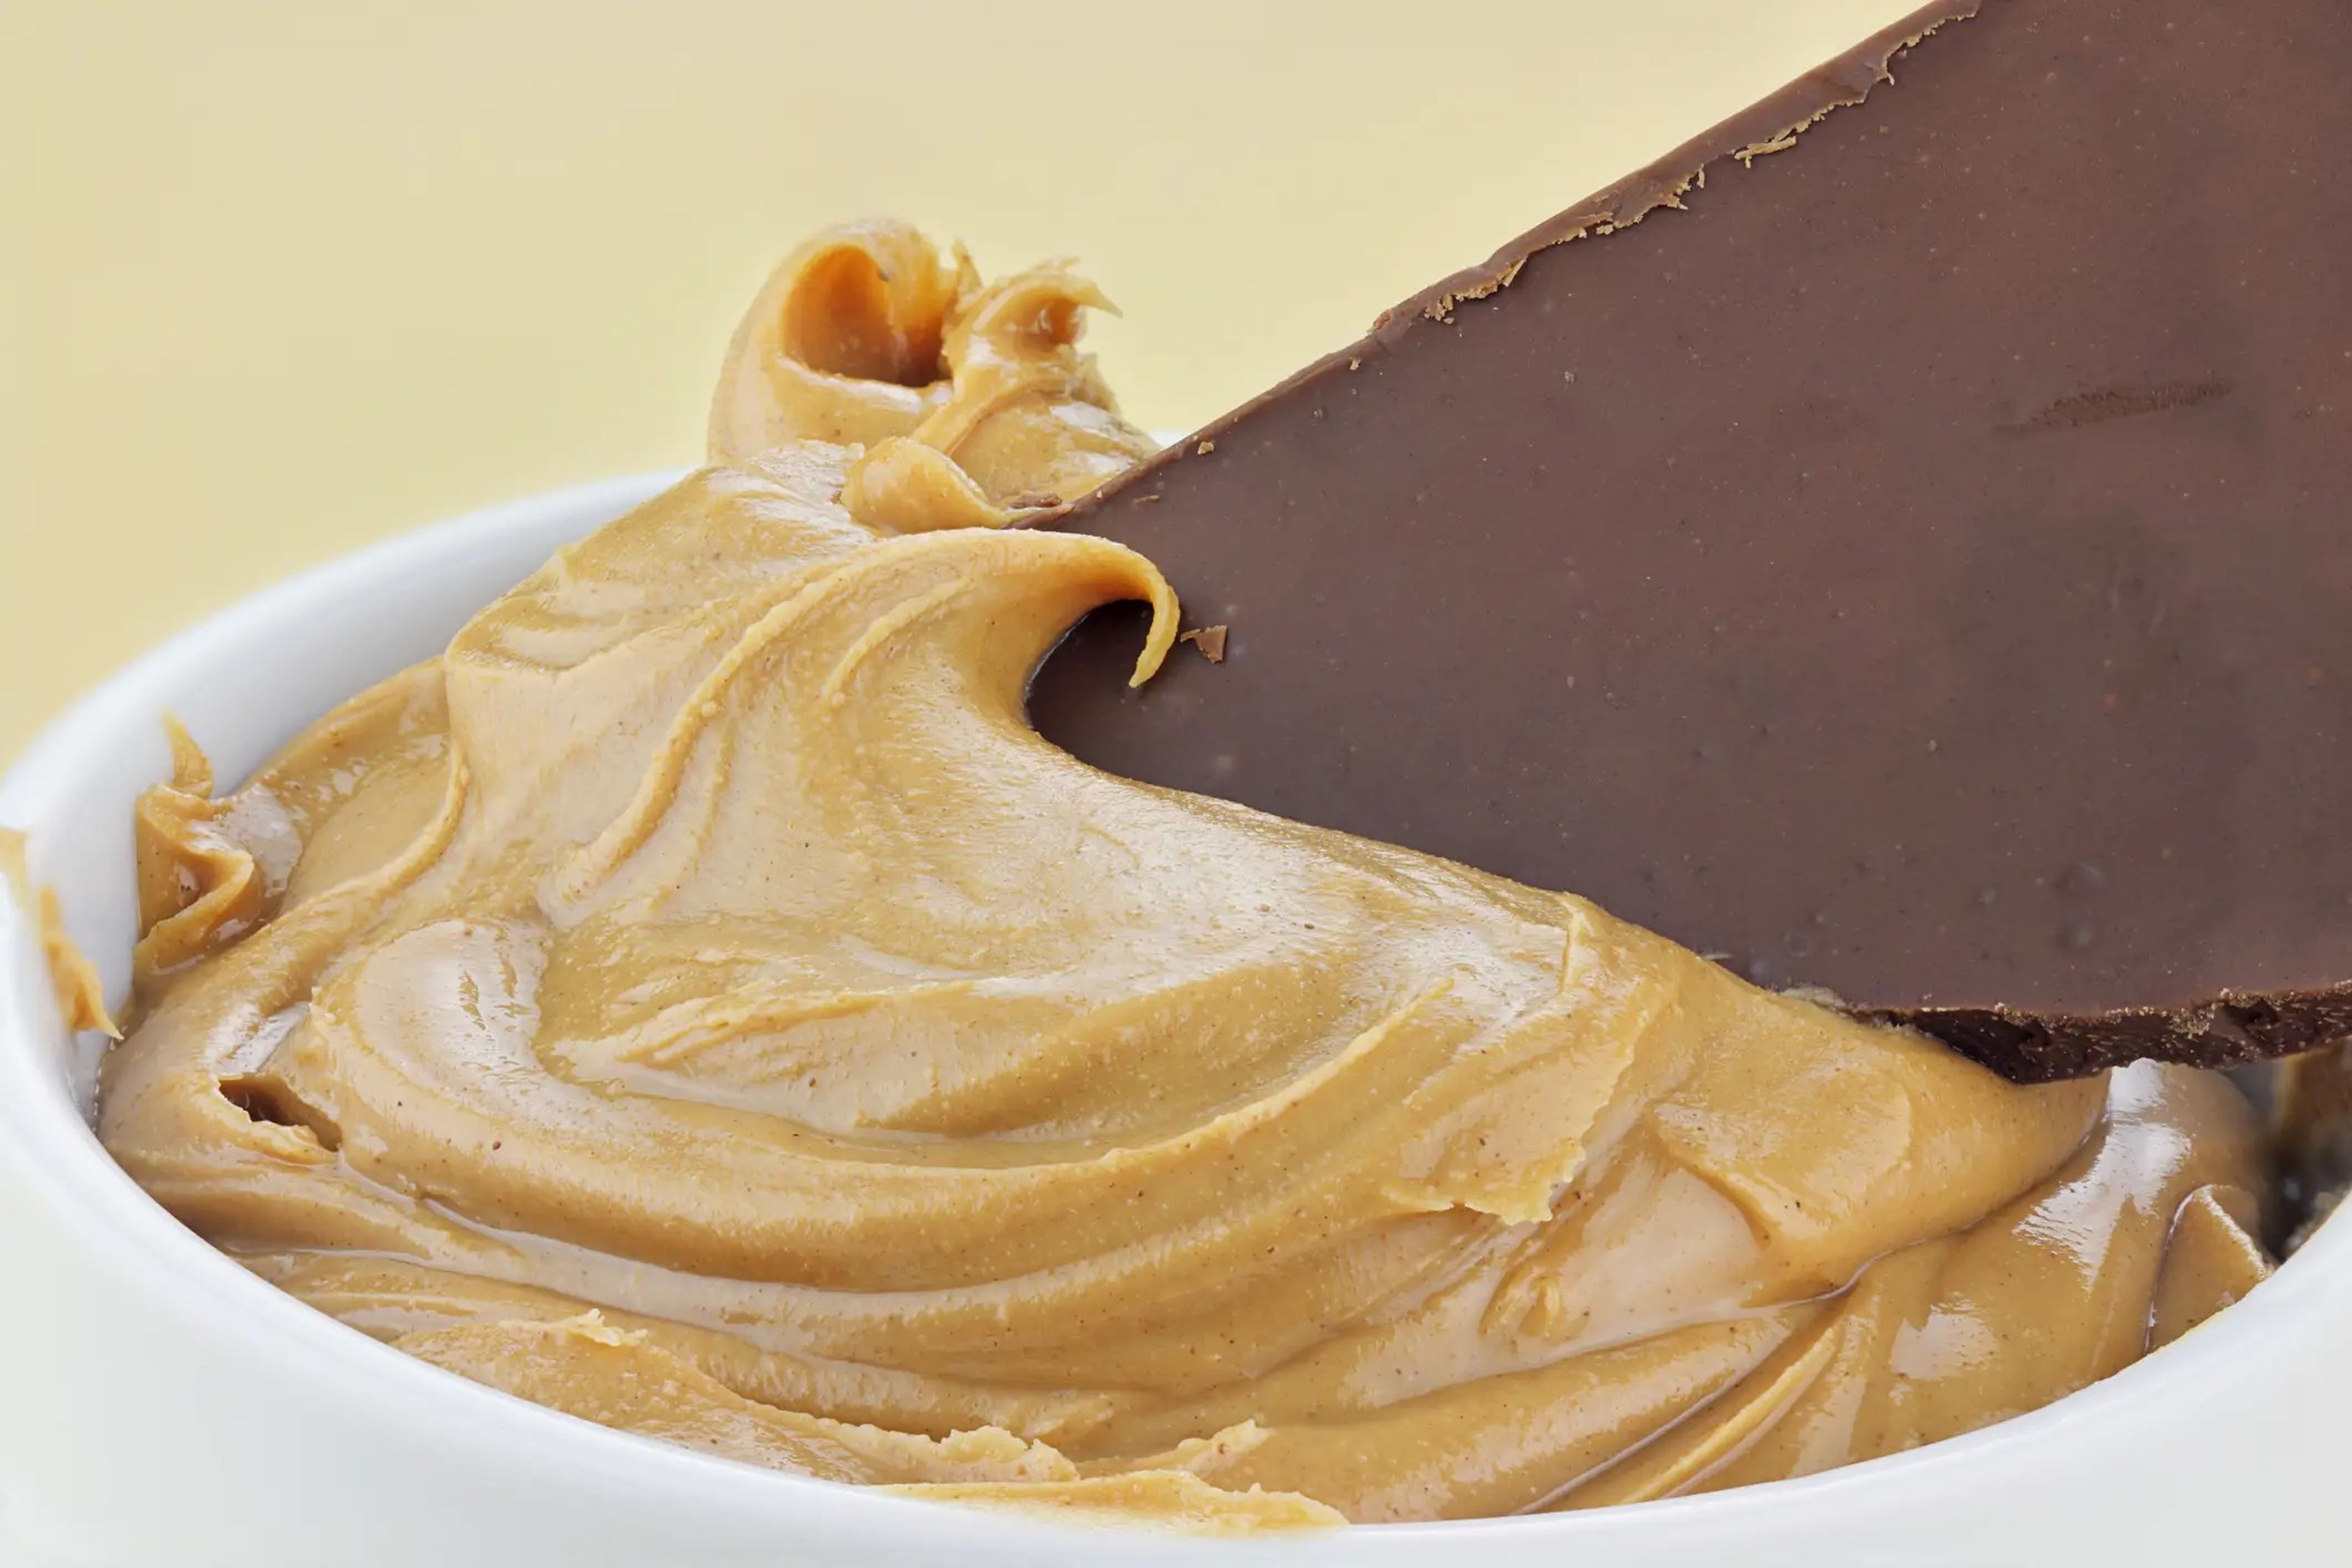 Dark chocolate and peanut butter is a delicious combination.